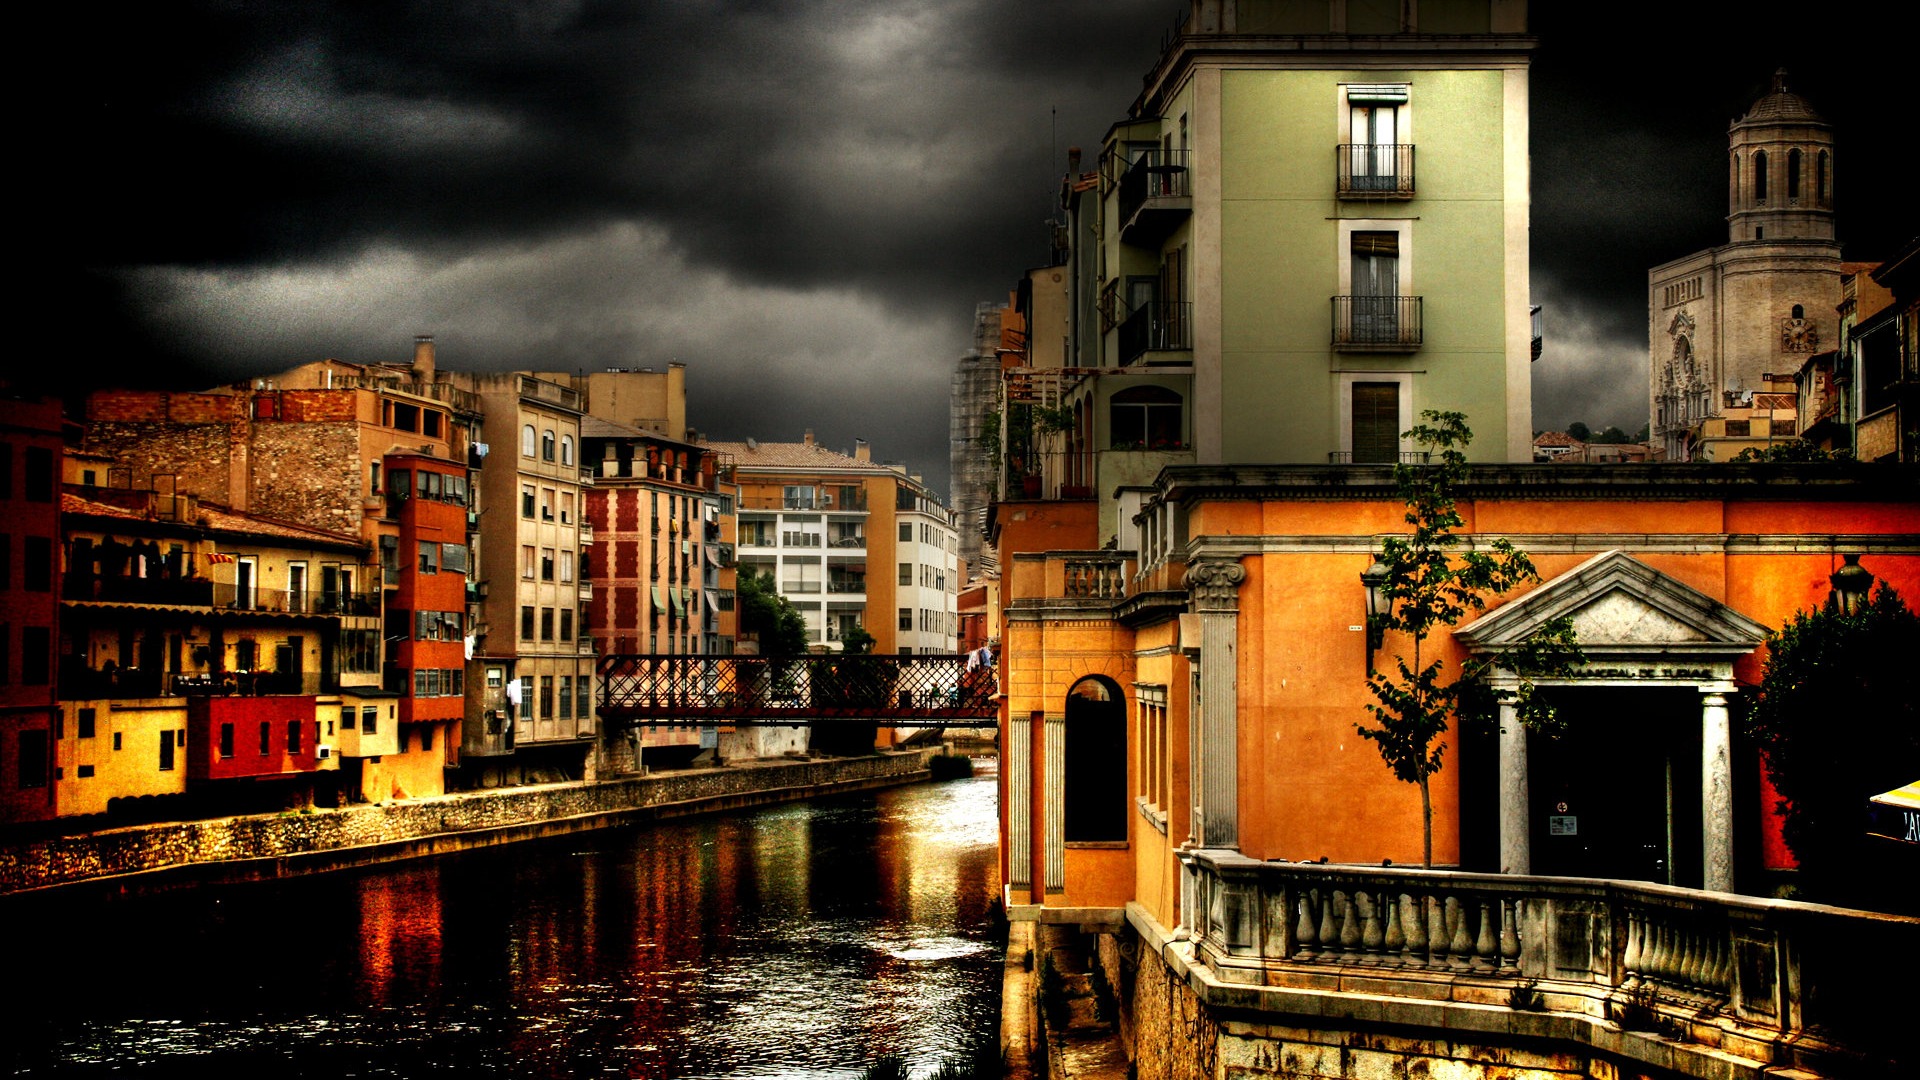 Espagne Girona HDR-style wallpapers #20 - 1920x1080